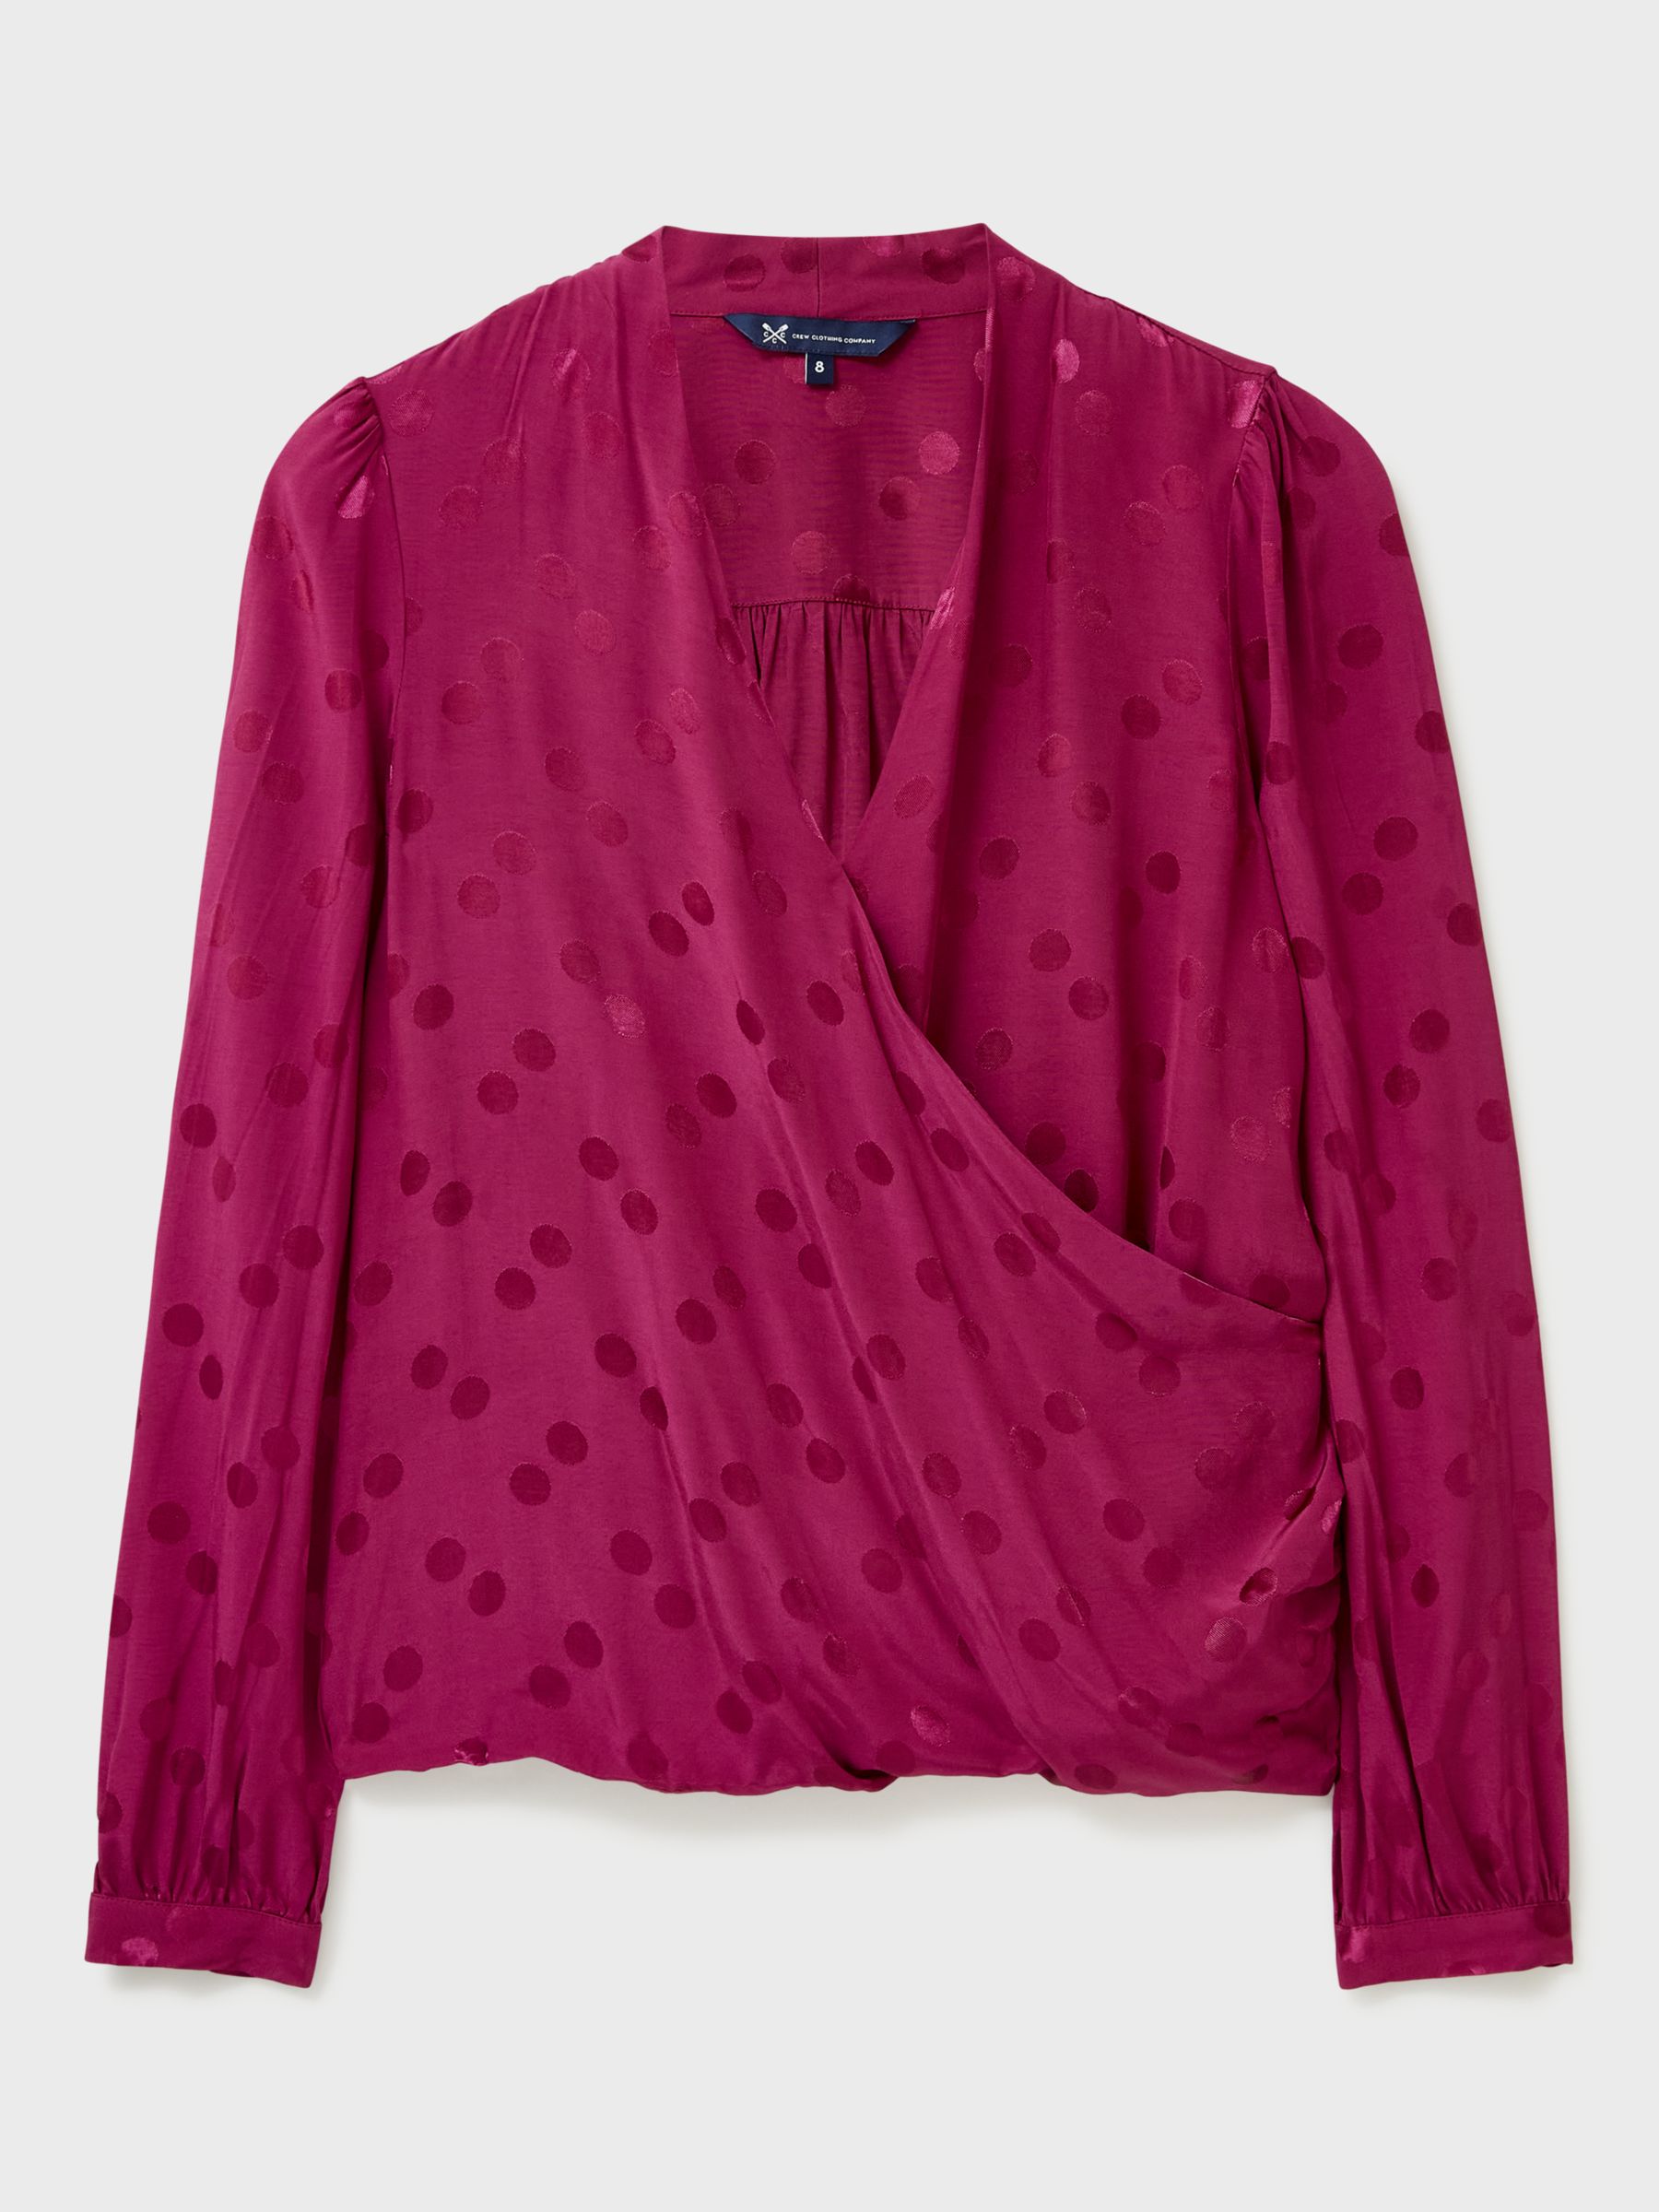 Buy Crew Clothing Jacquard Wrap Blouse, Berry Red Online at johnlewis.com